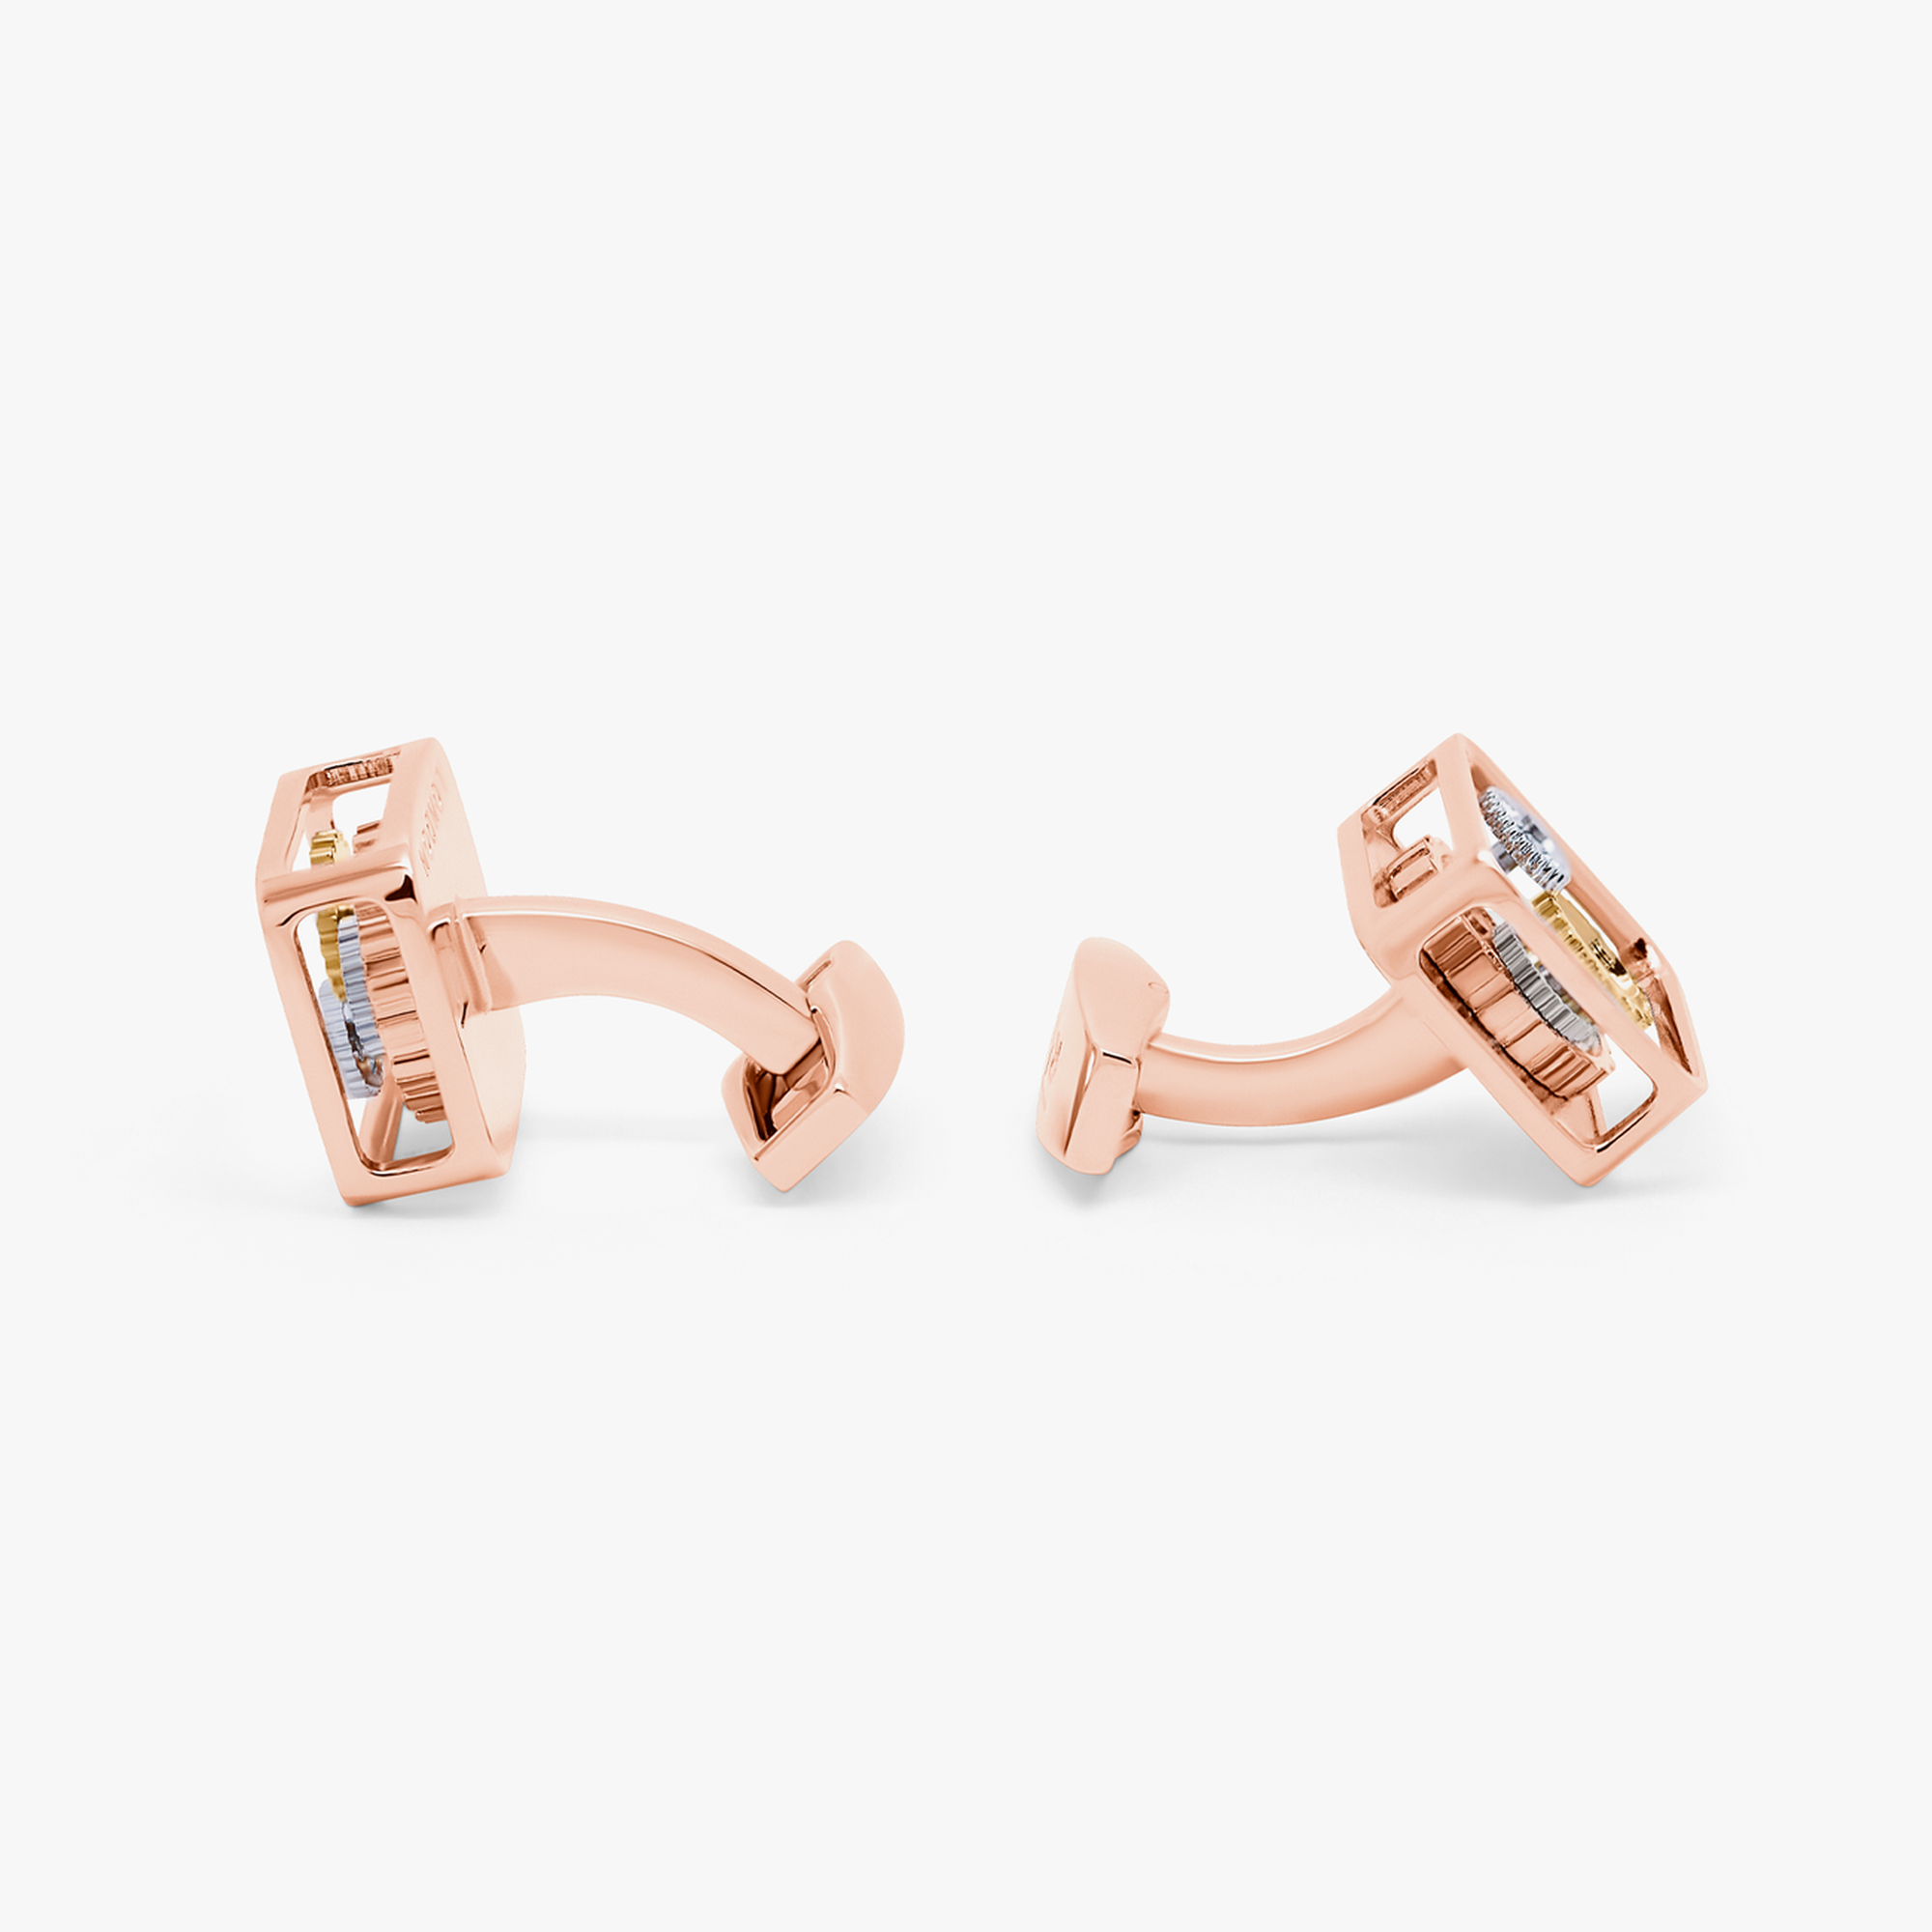 Square Gear cufflinks in rose gold plated stainless steel - Tateossian-Cufflinks.com.sg